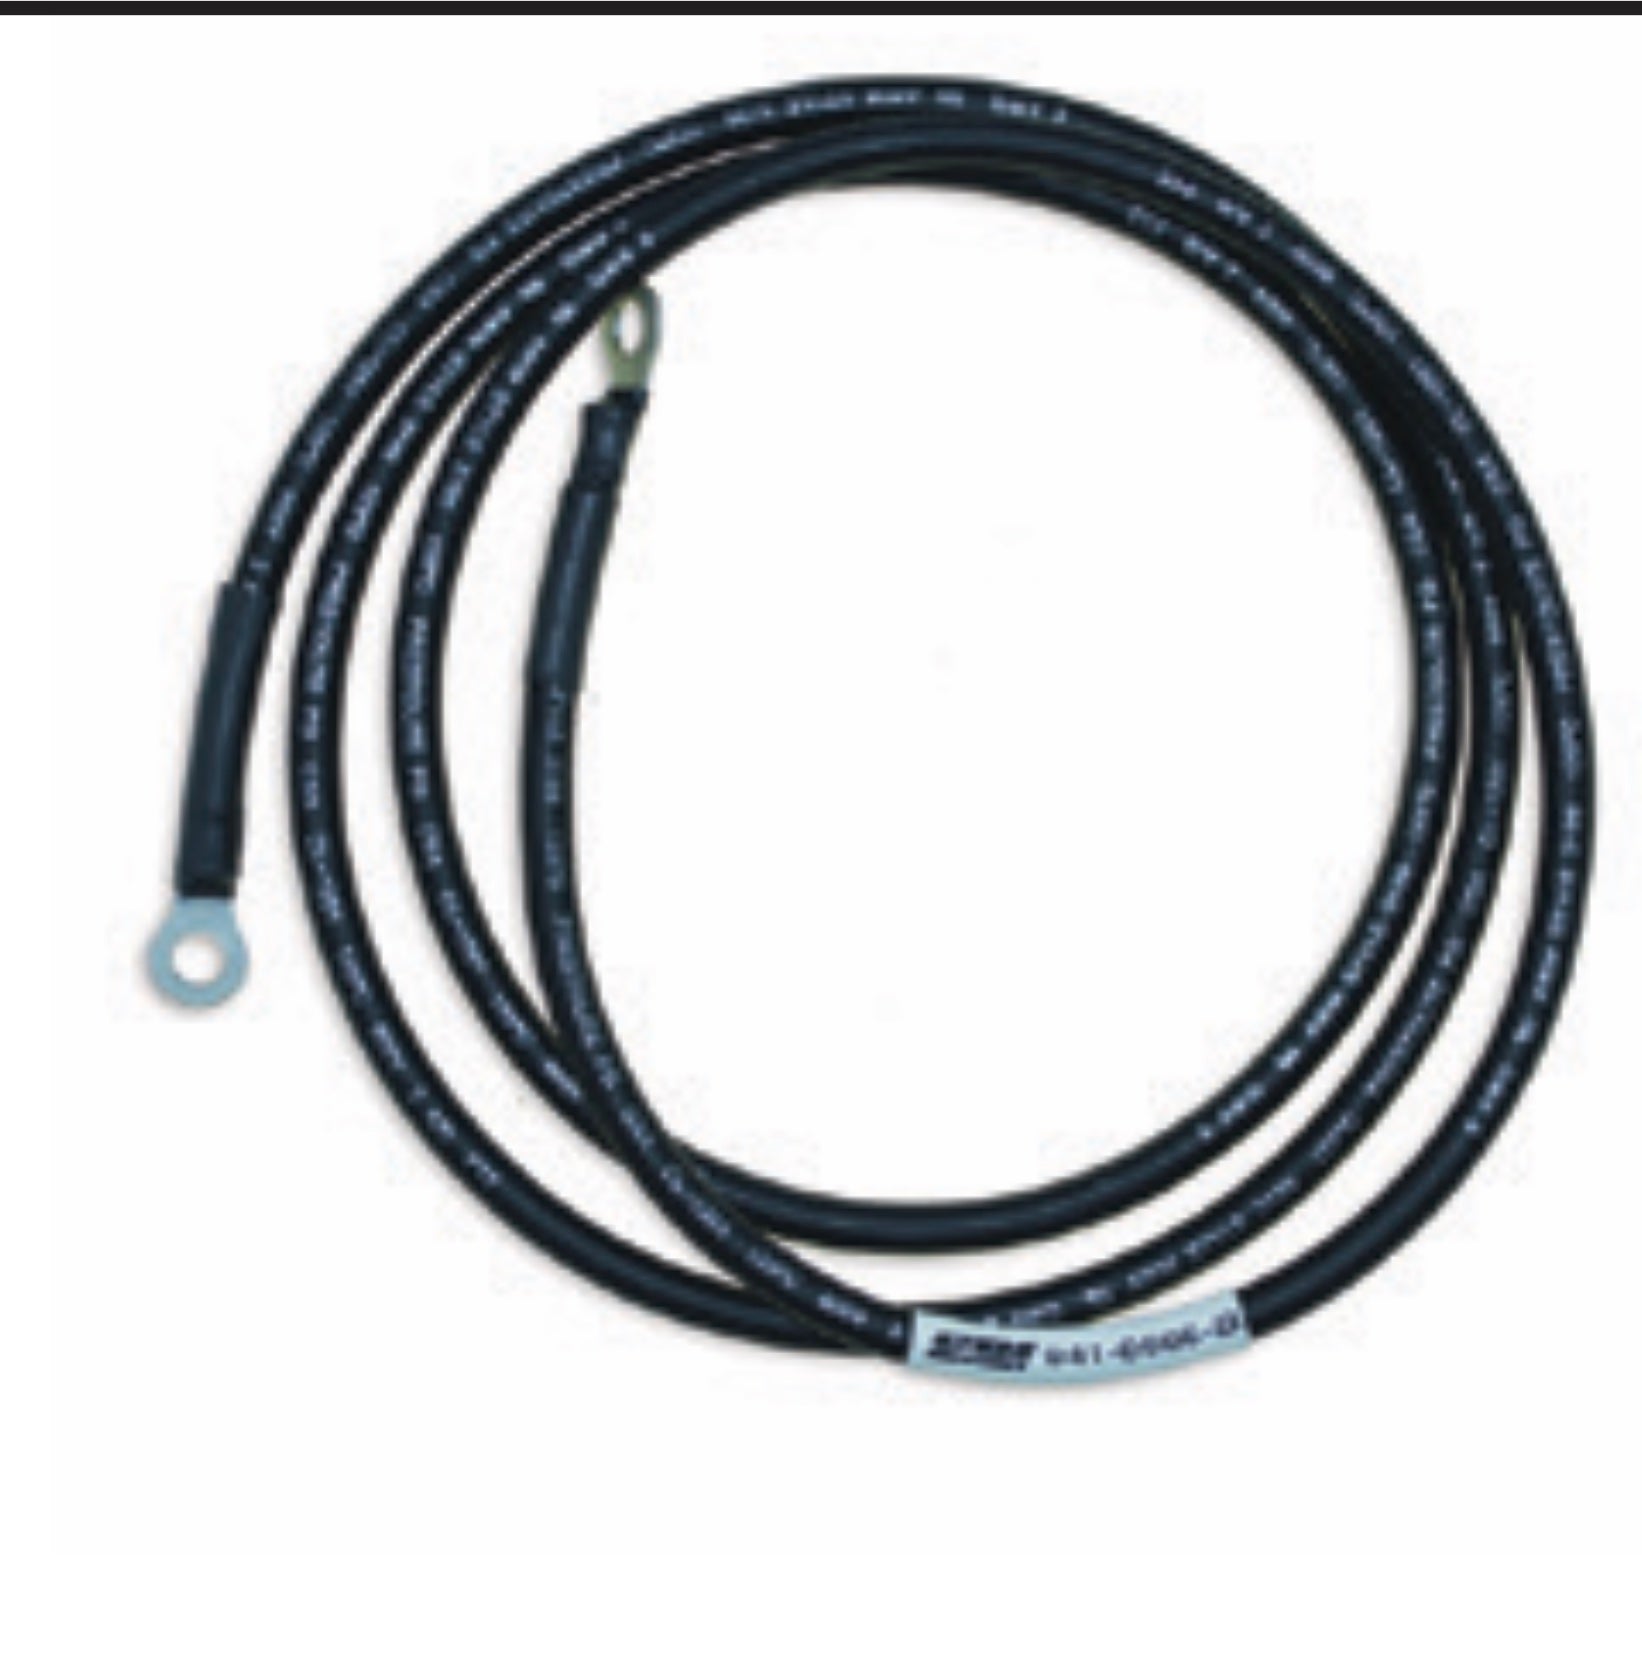 6 ft. black battery cable